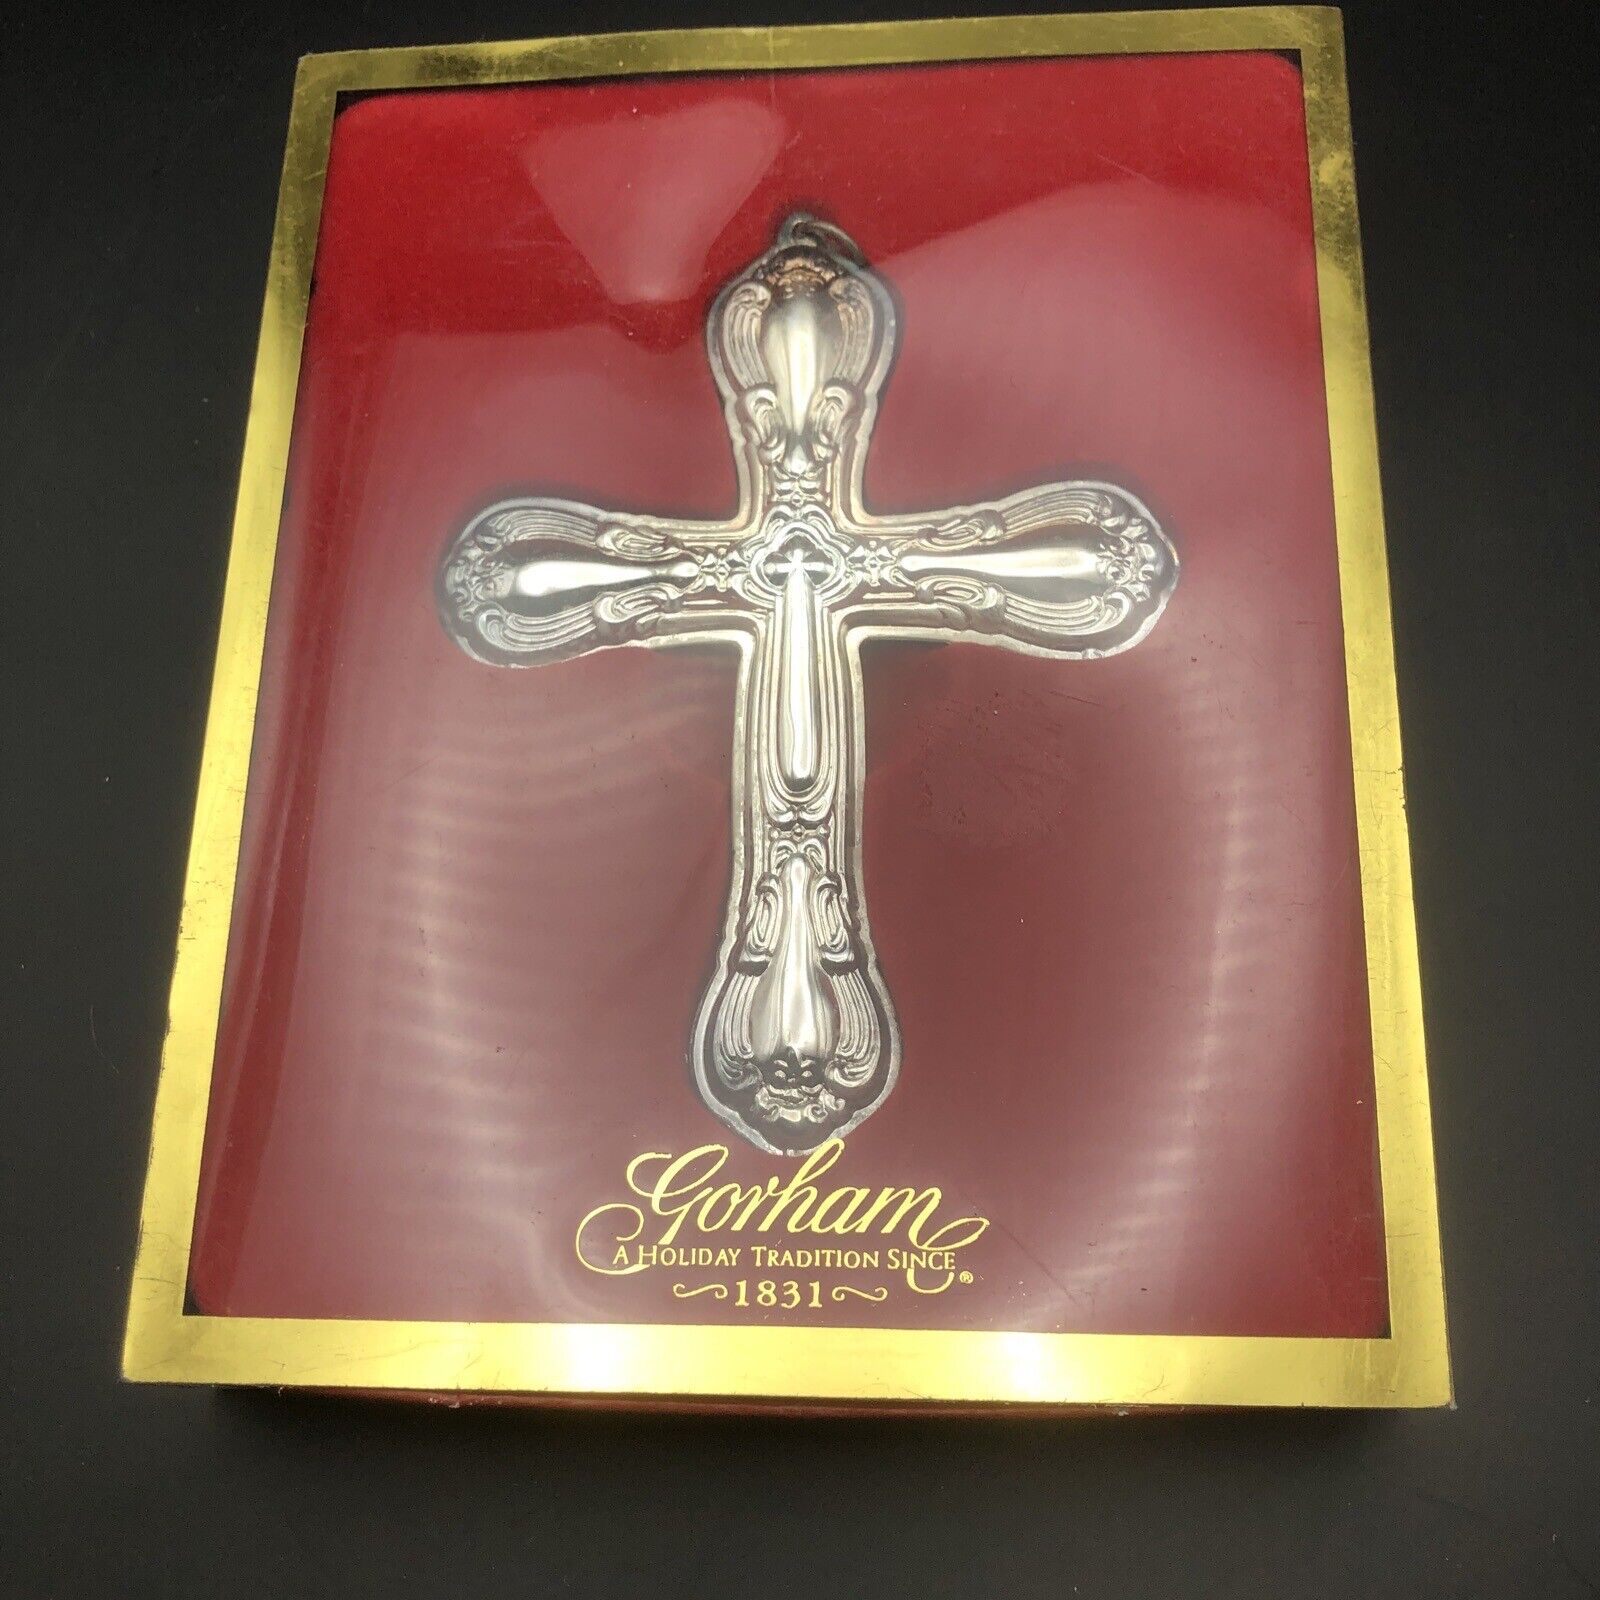 Gorham 1831 Silverplated Chantilly Cross Christmas Ornament NEW In box. VINTAGE